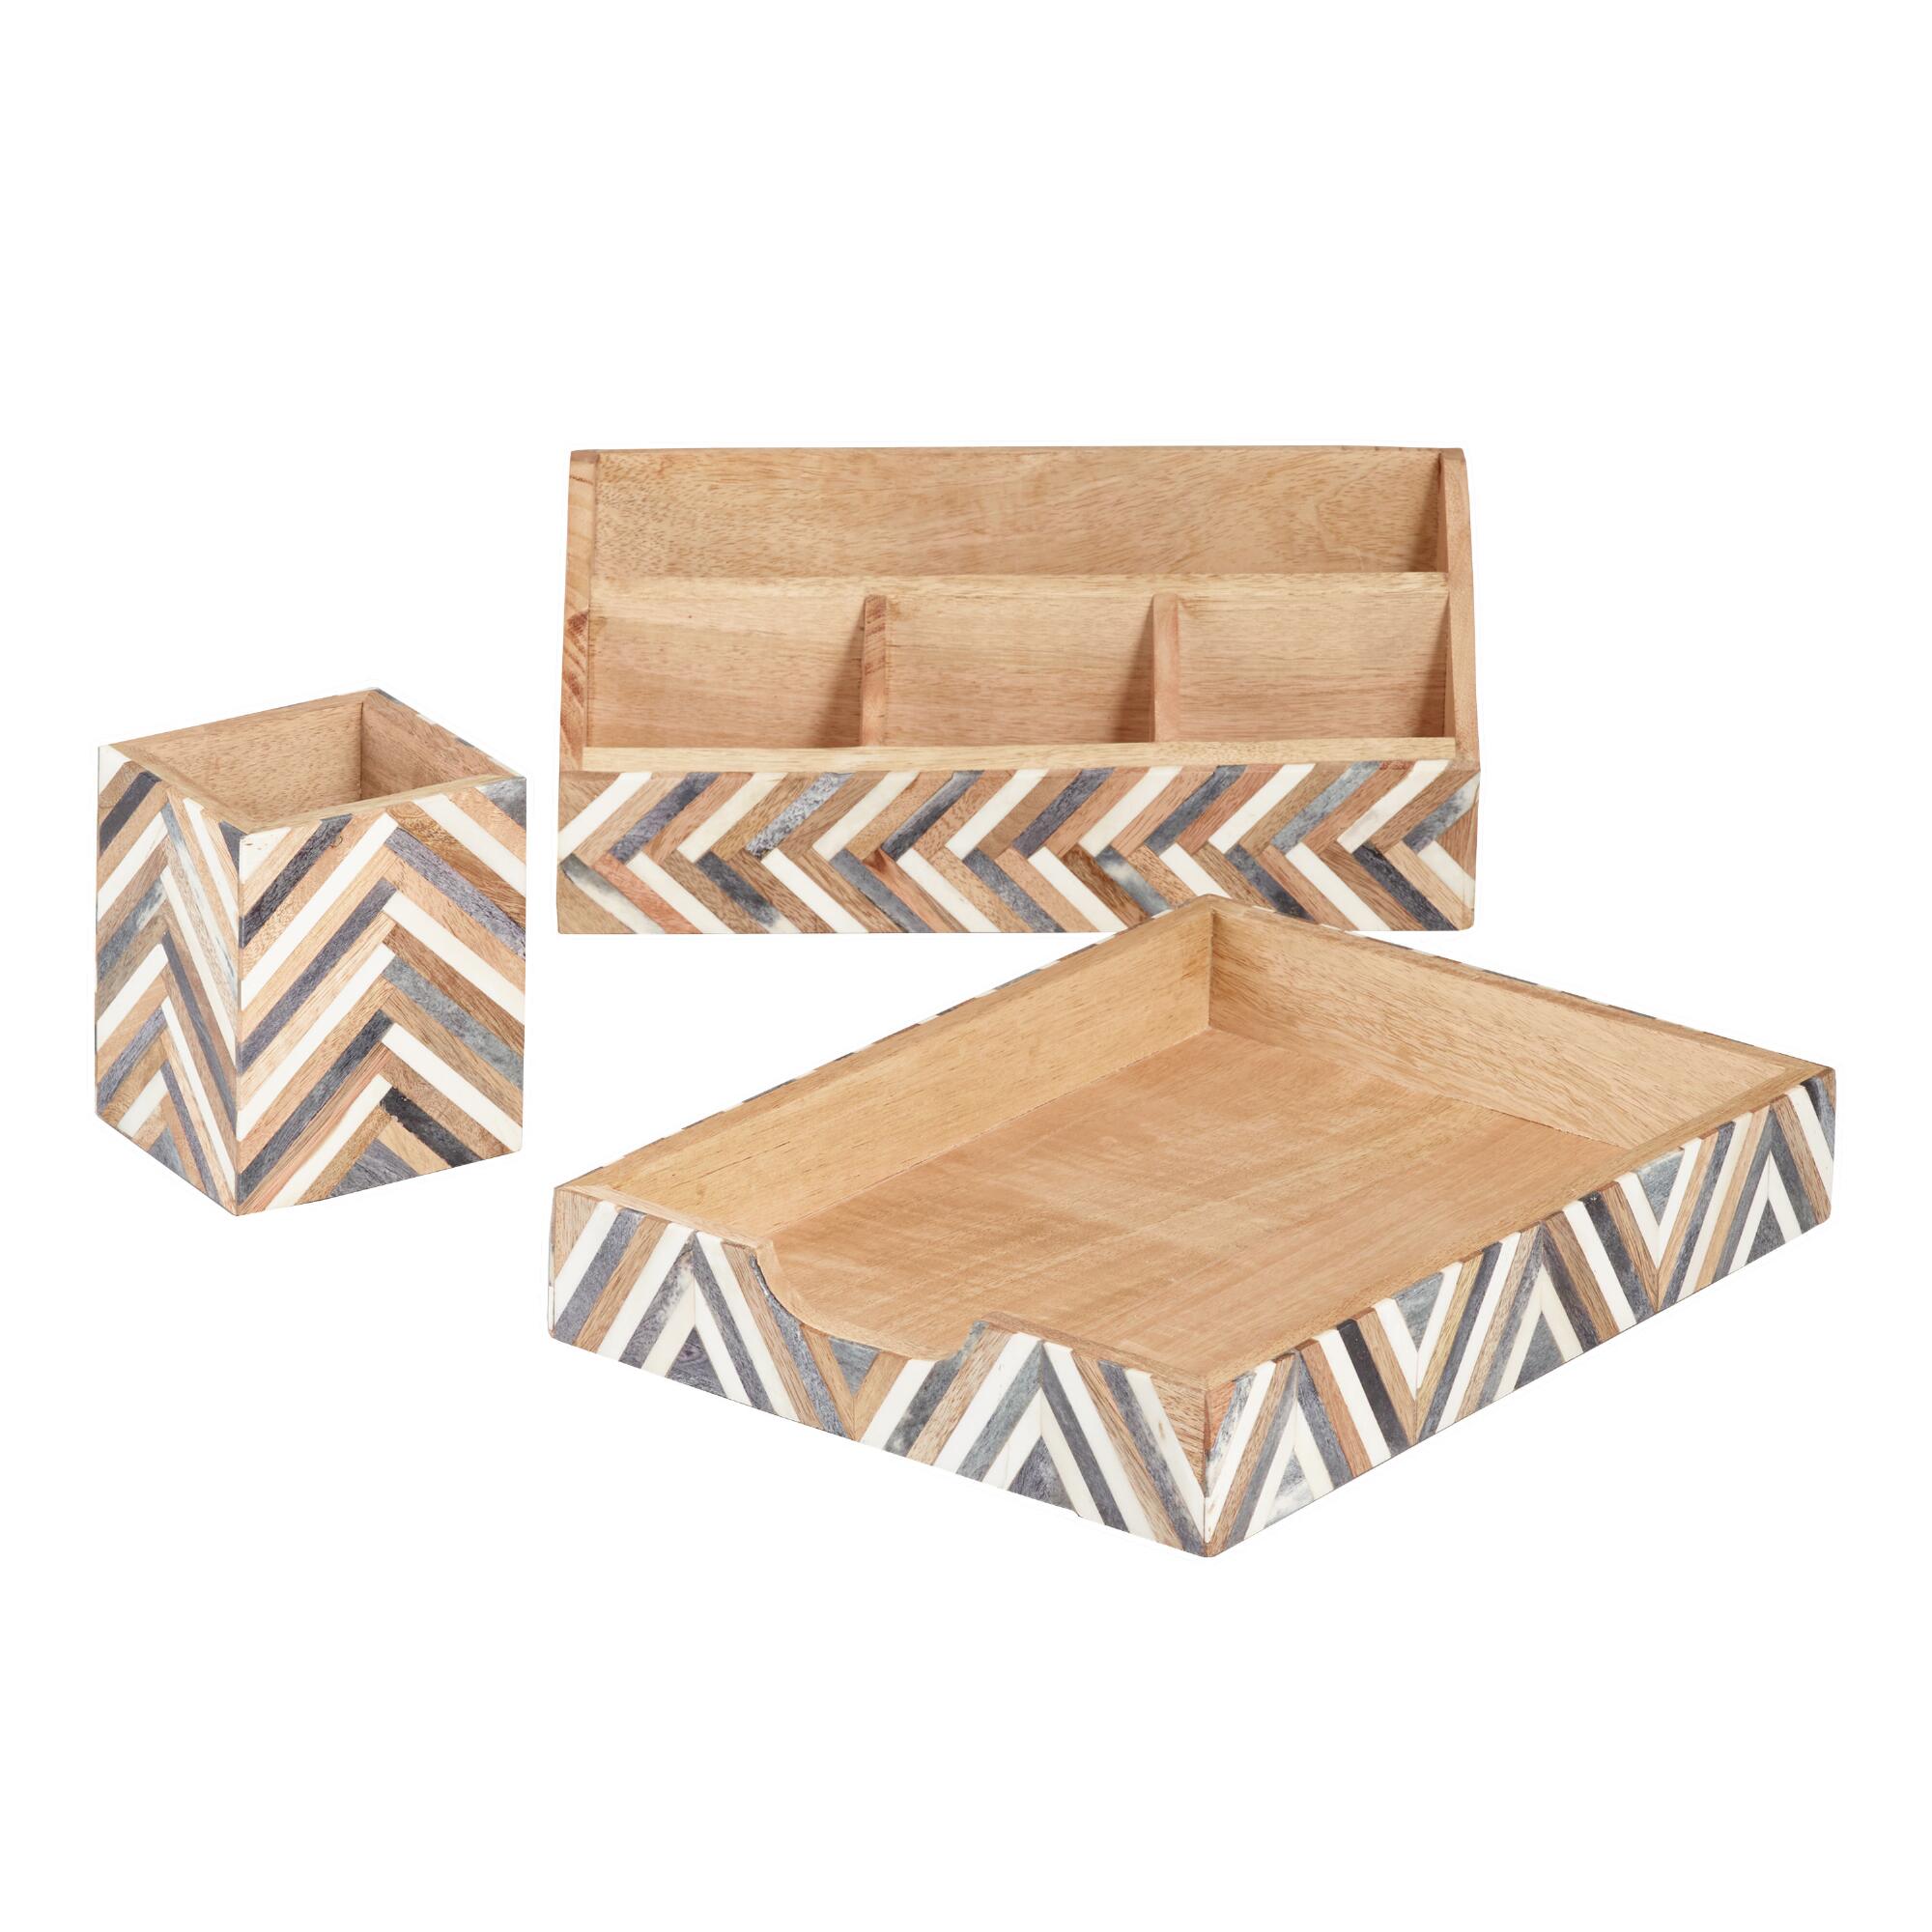 Bone and Wood Chevron Sydney Desk Accessories Collection by World Market